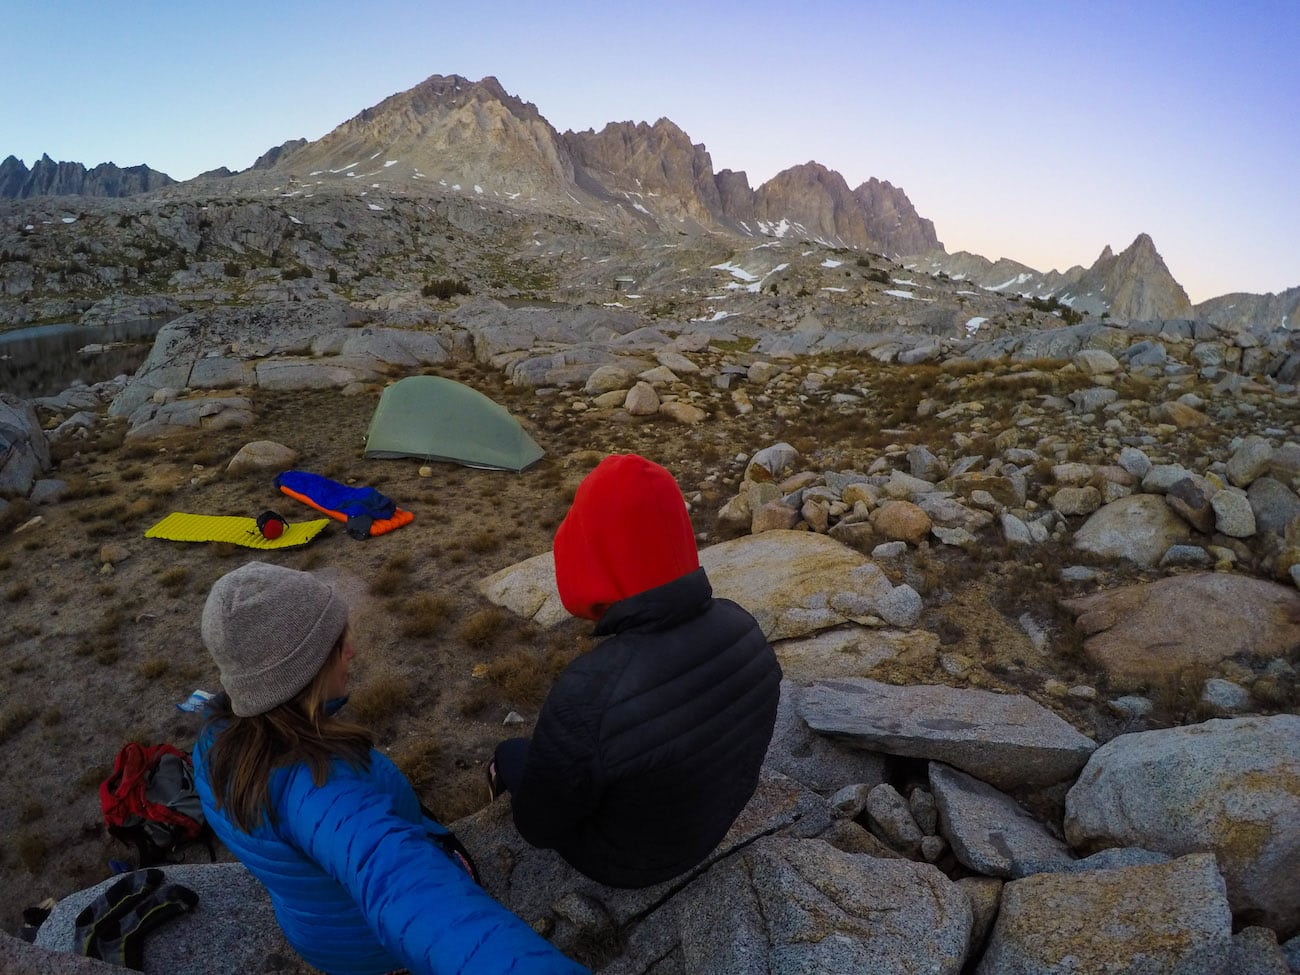 Get all the info - routes, campsites, permits, gear & more - for a weekend backpacking trip over Bishop Pass to Dusy Basin Lakes in the eastern Sierras. 